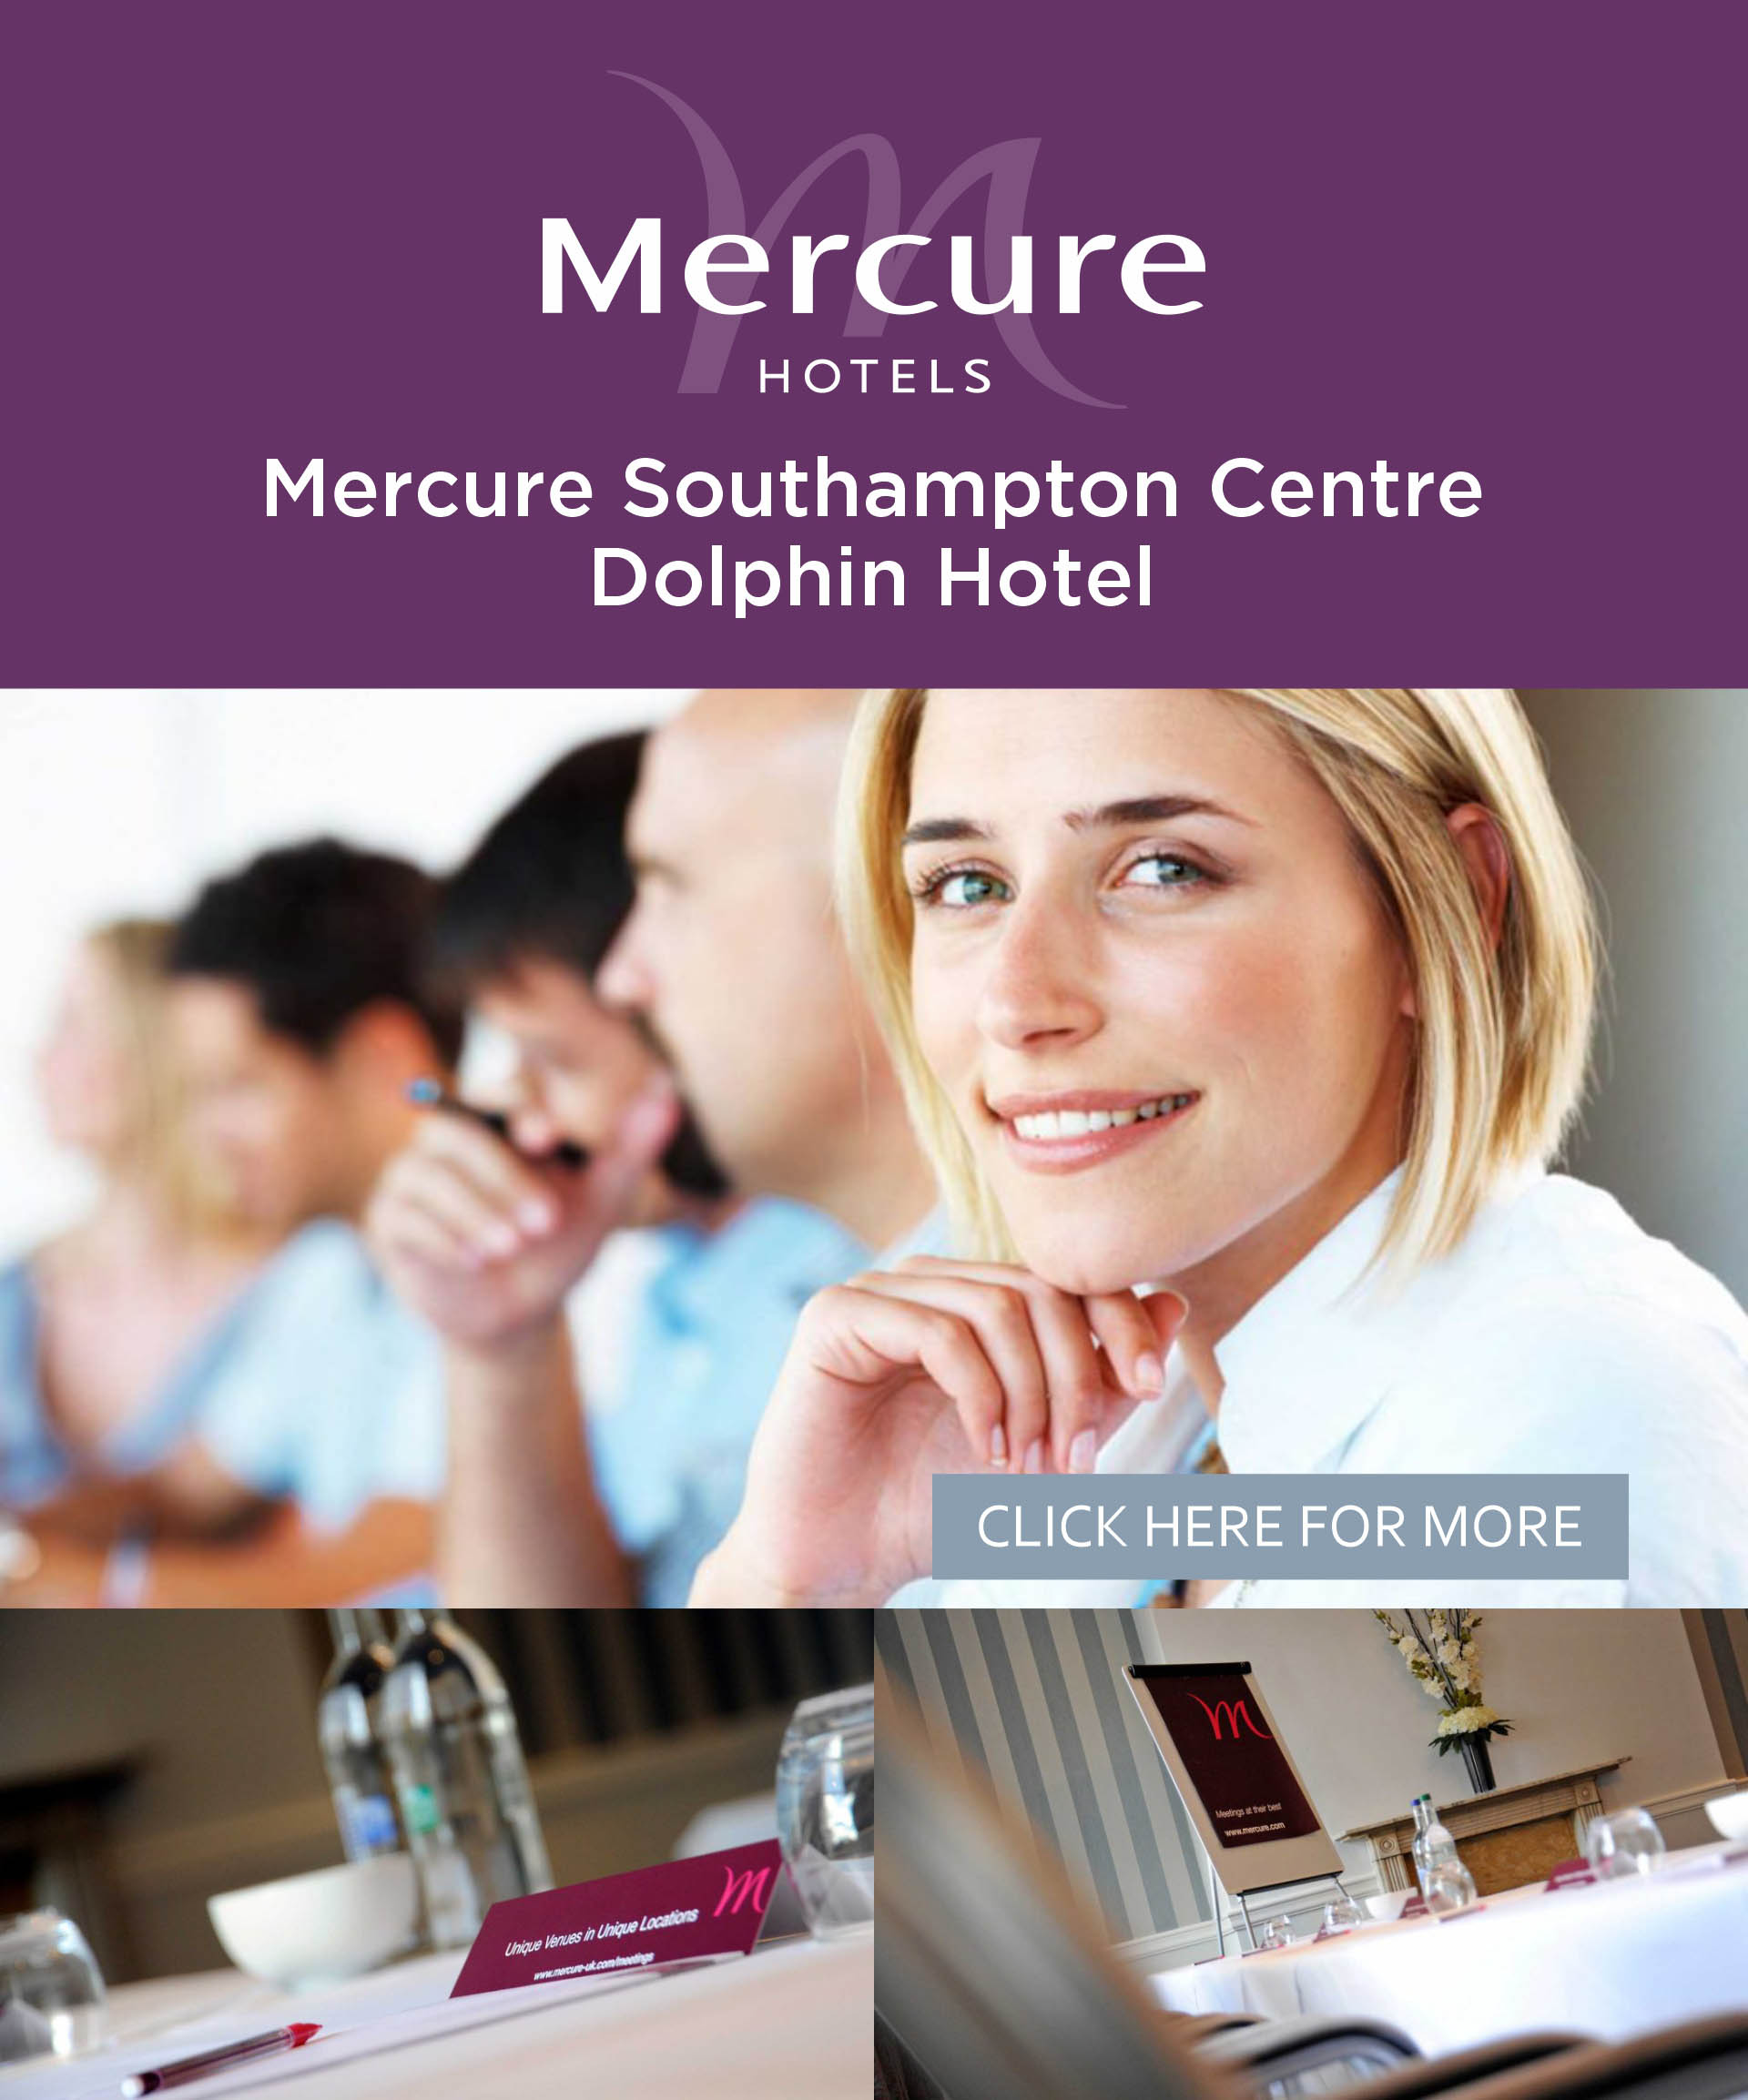 Mercure Southampton Centre Dolphin Hotel meeting offer